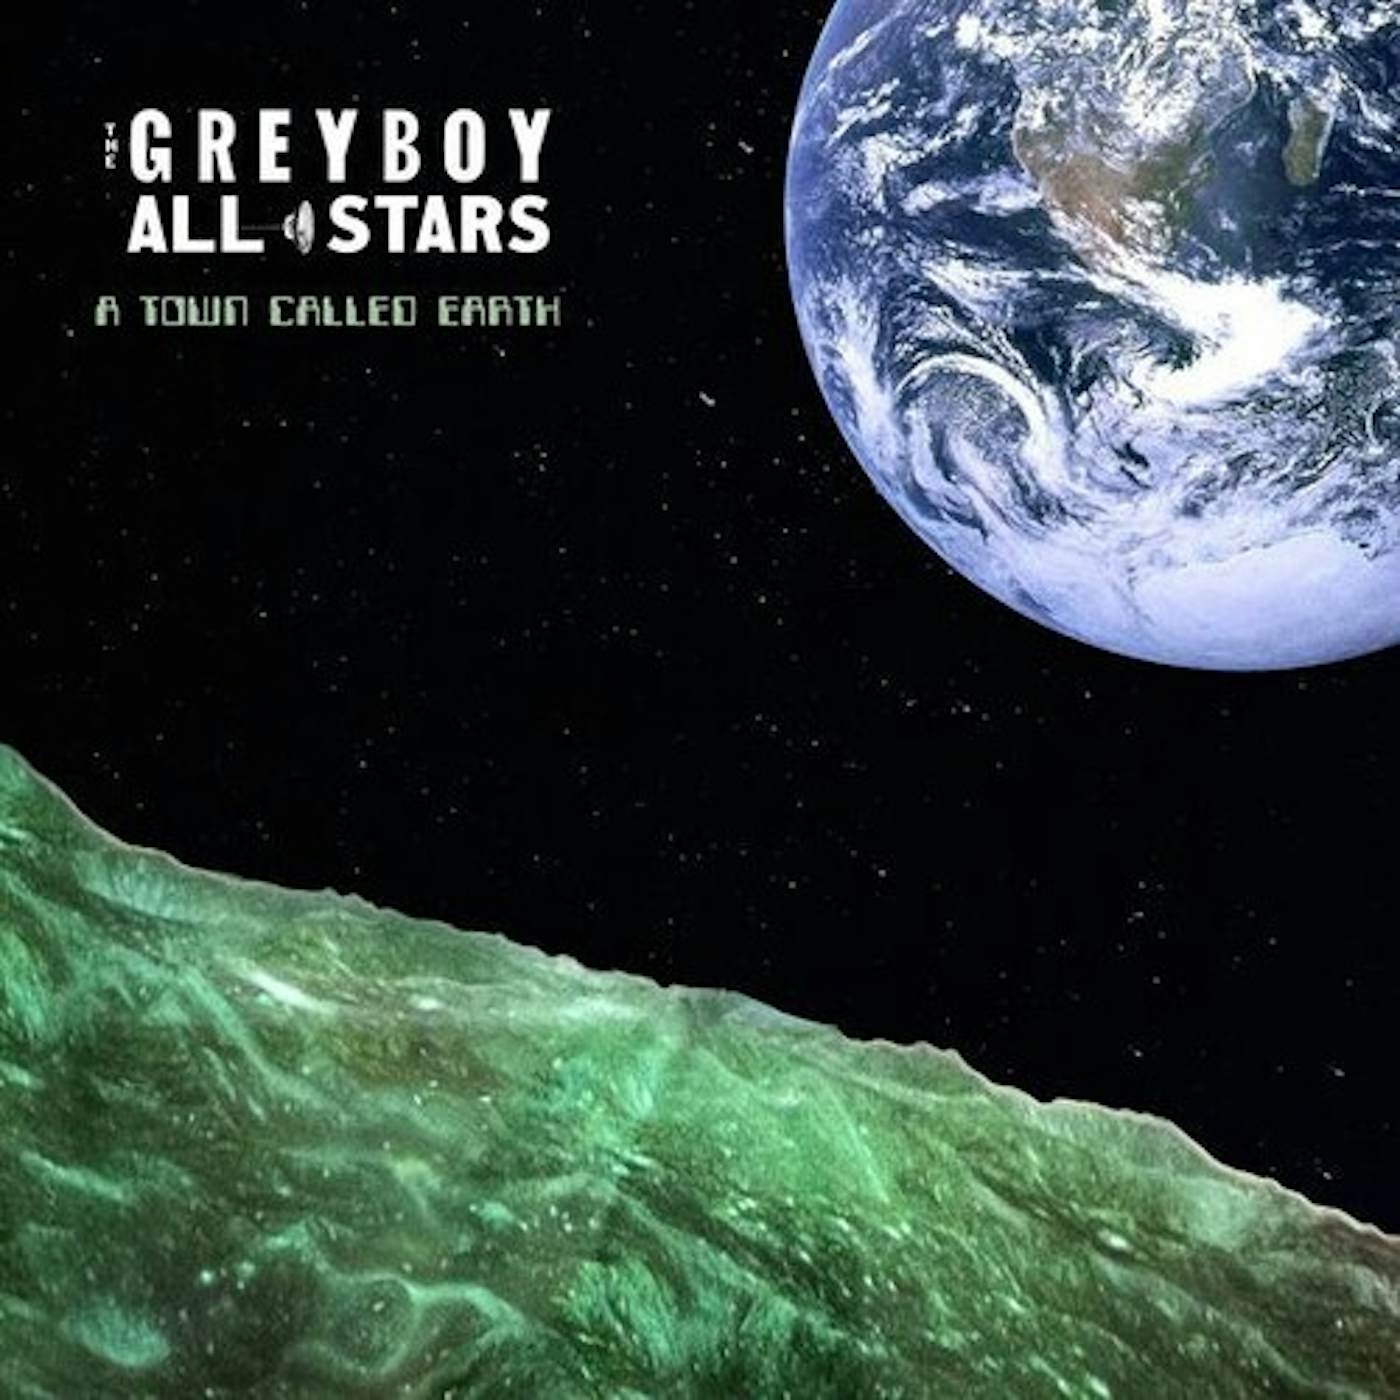 The Greyboy Allstars Town Called Earth Vinyl Record